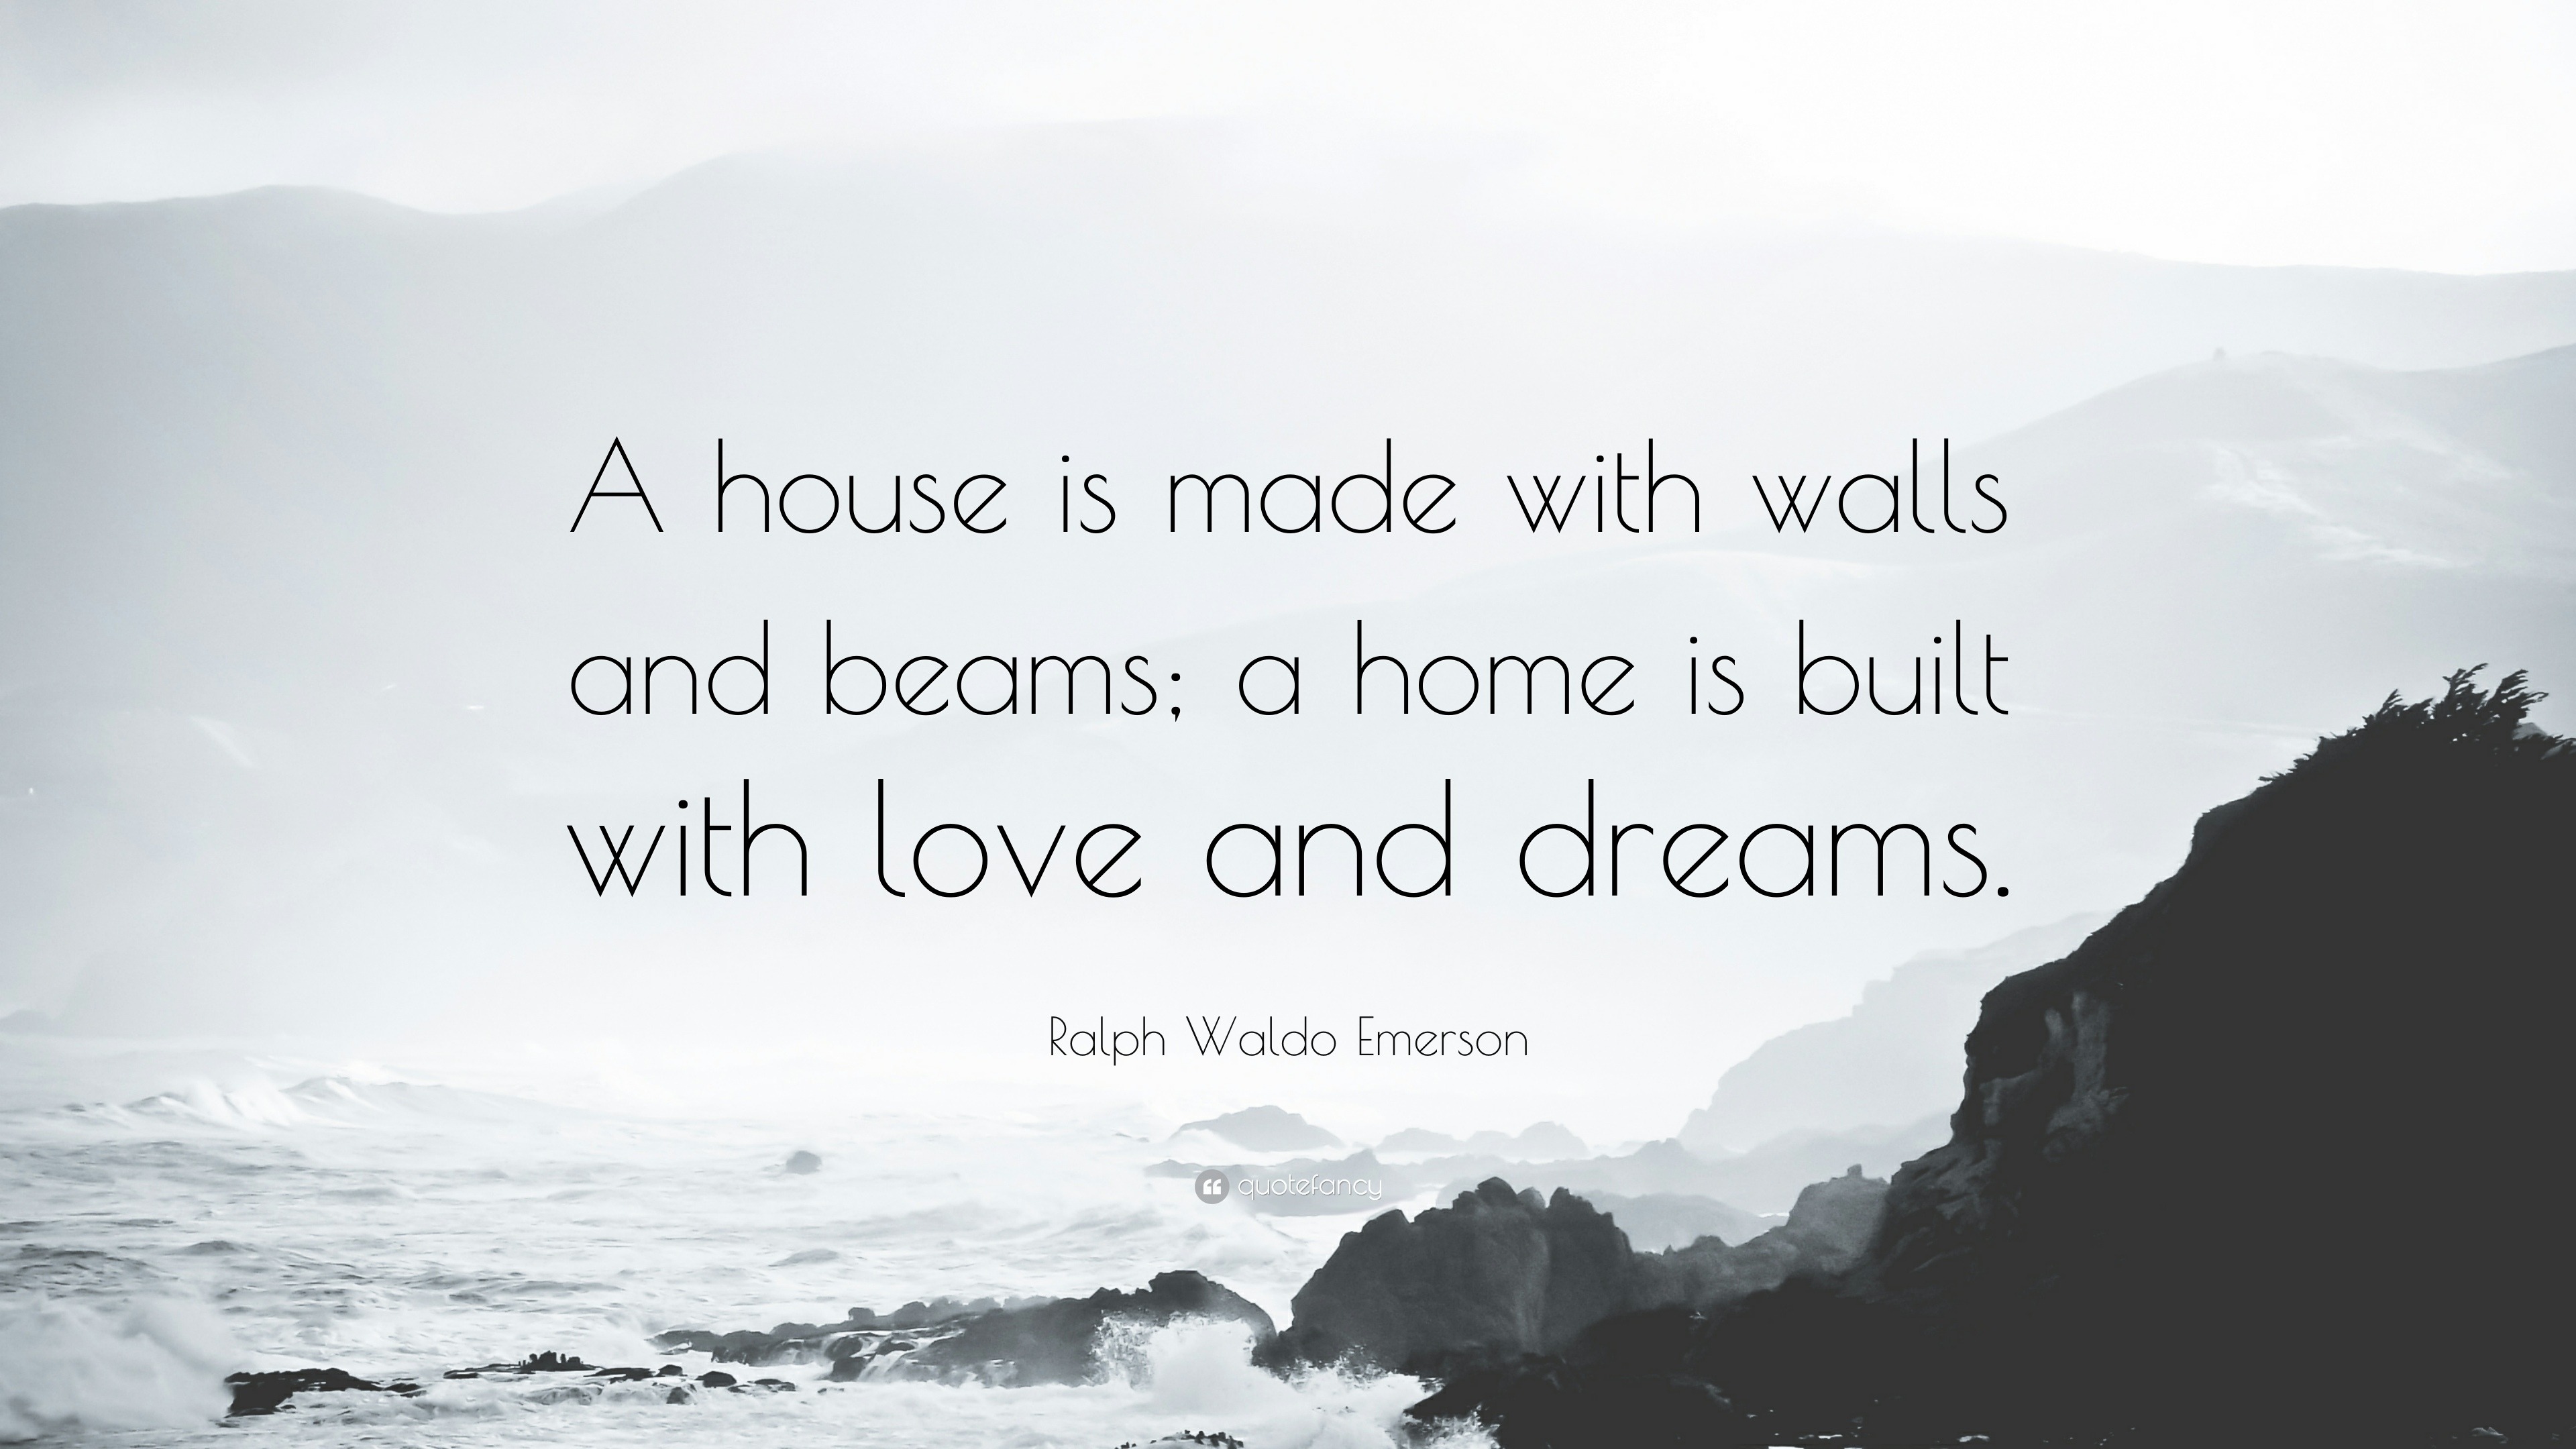 Ralph Waldo Emerson Quote: “A house is made with walls and beams; a